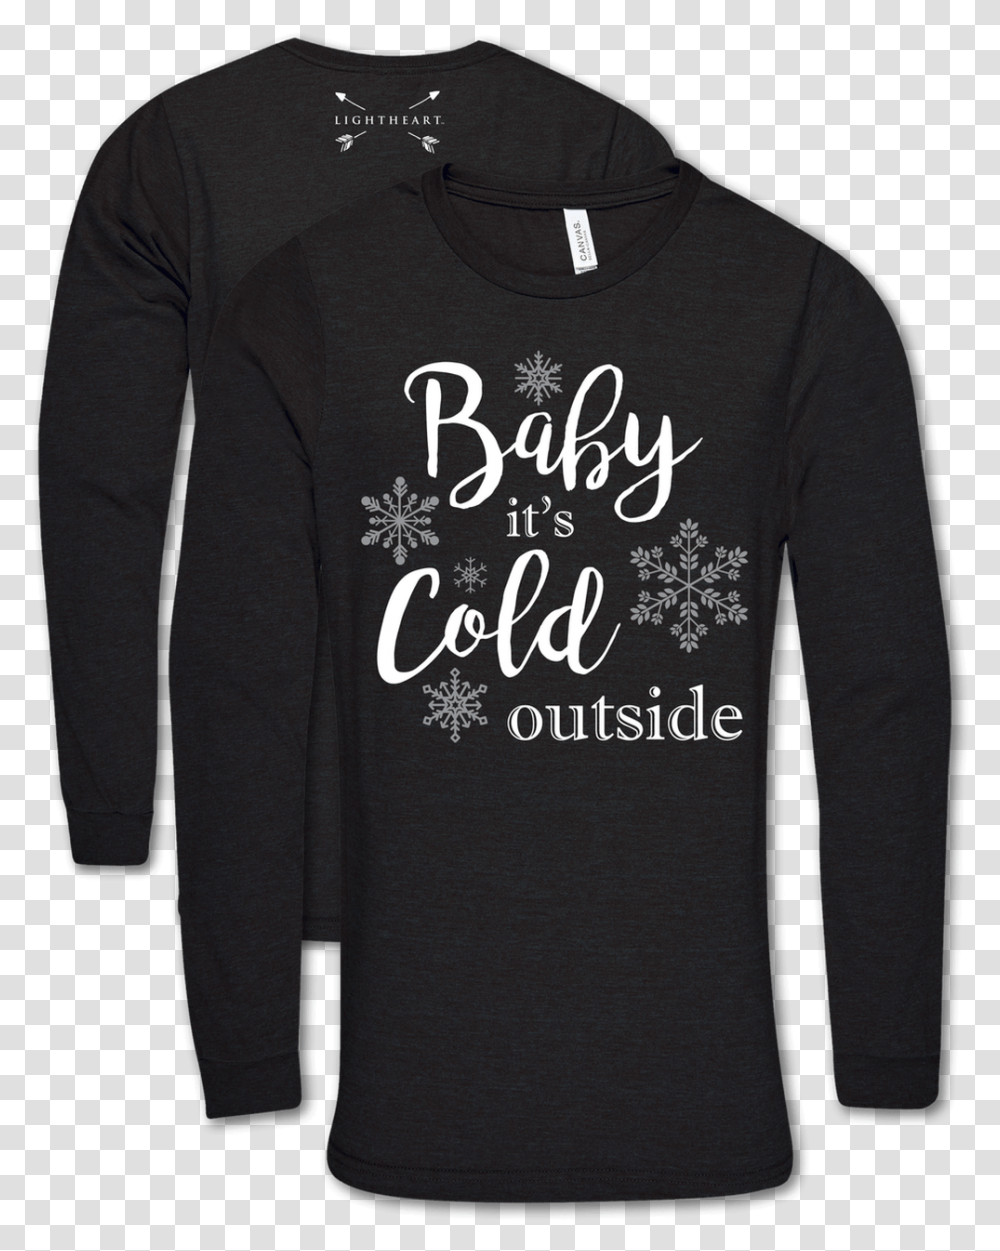 Lightheart Baby It's Cold Outside Black Heather Ls Hoodie, Sleeve, Apparel, Long Sleeve Transparent Png